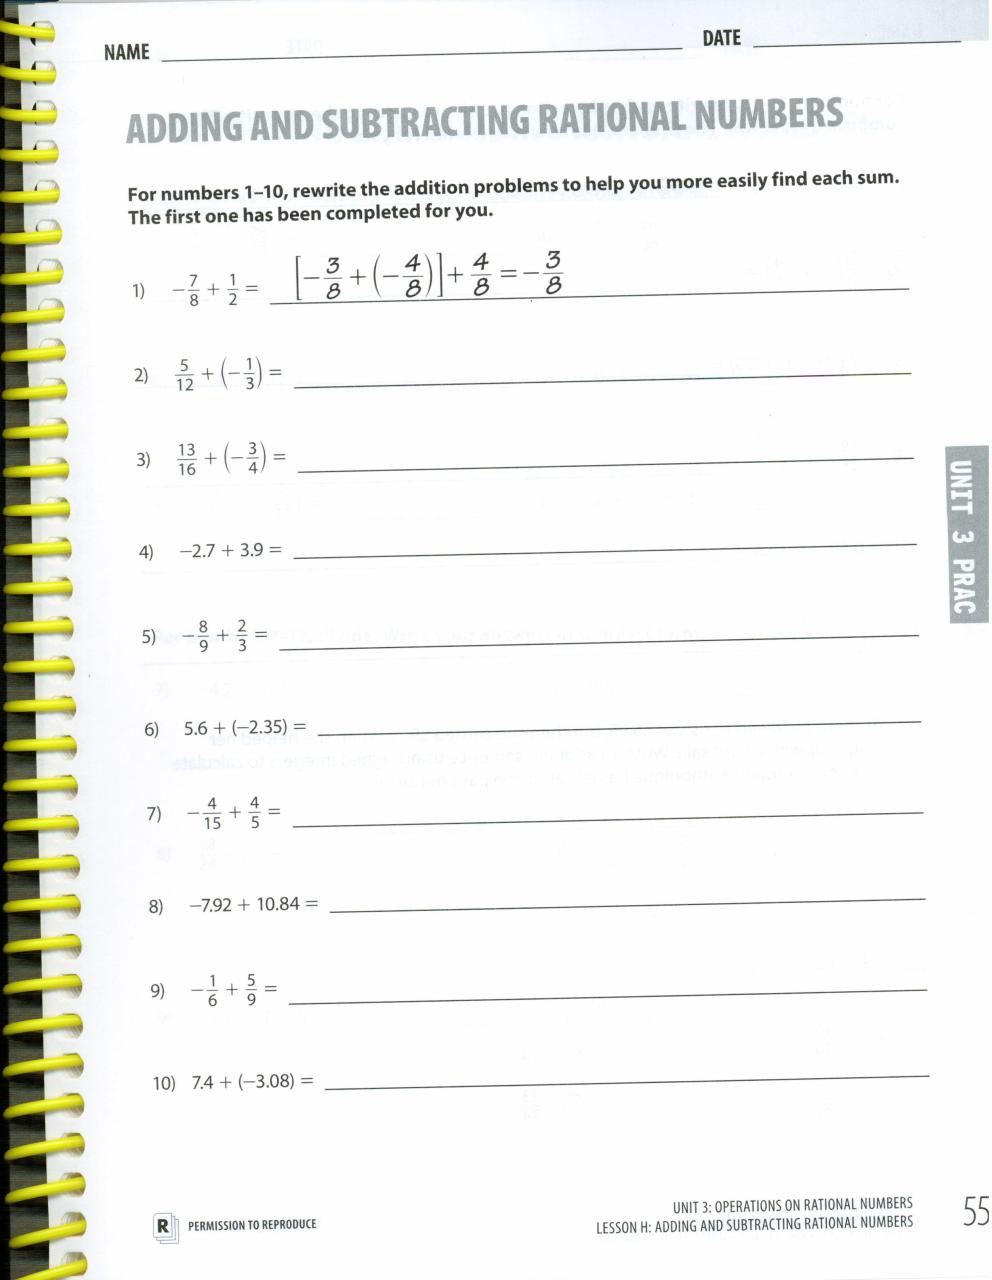 Adding And Subtracting Rational Numbers Worksheet Pdf